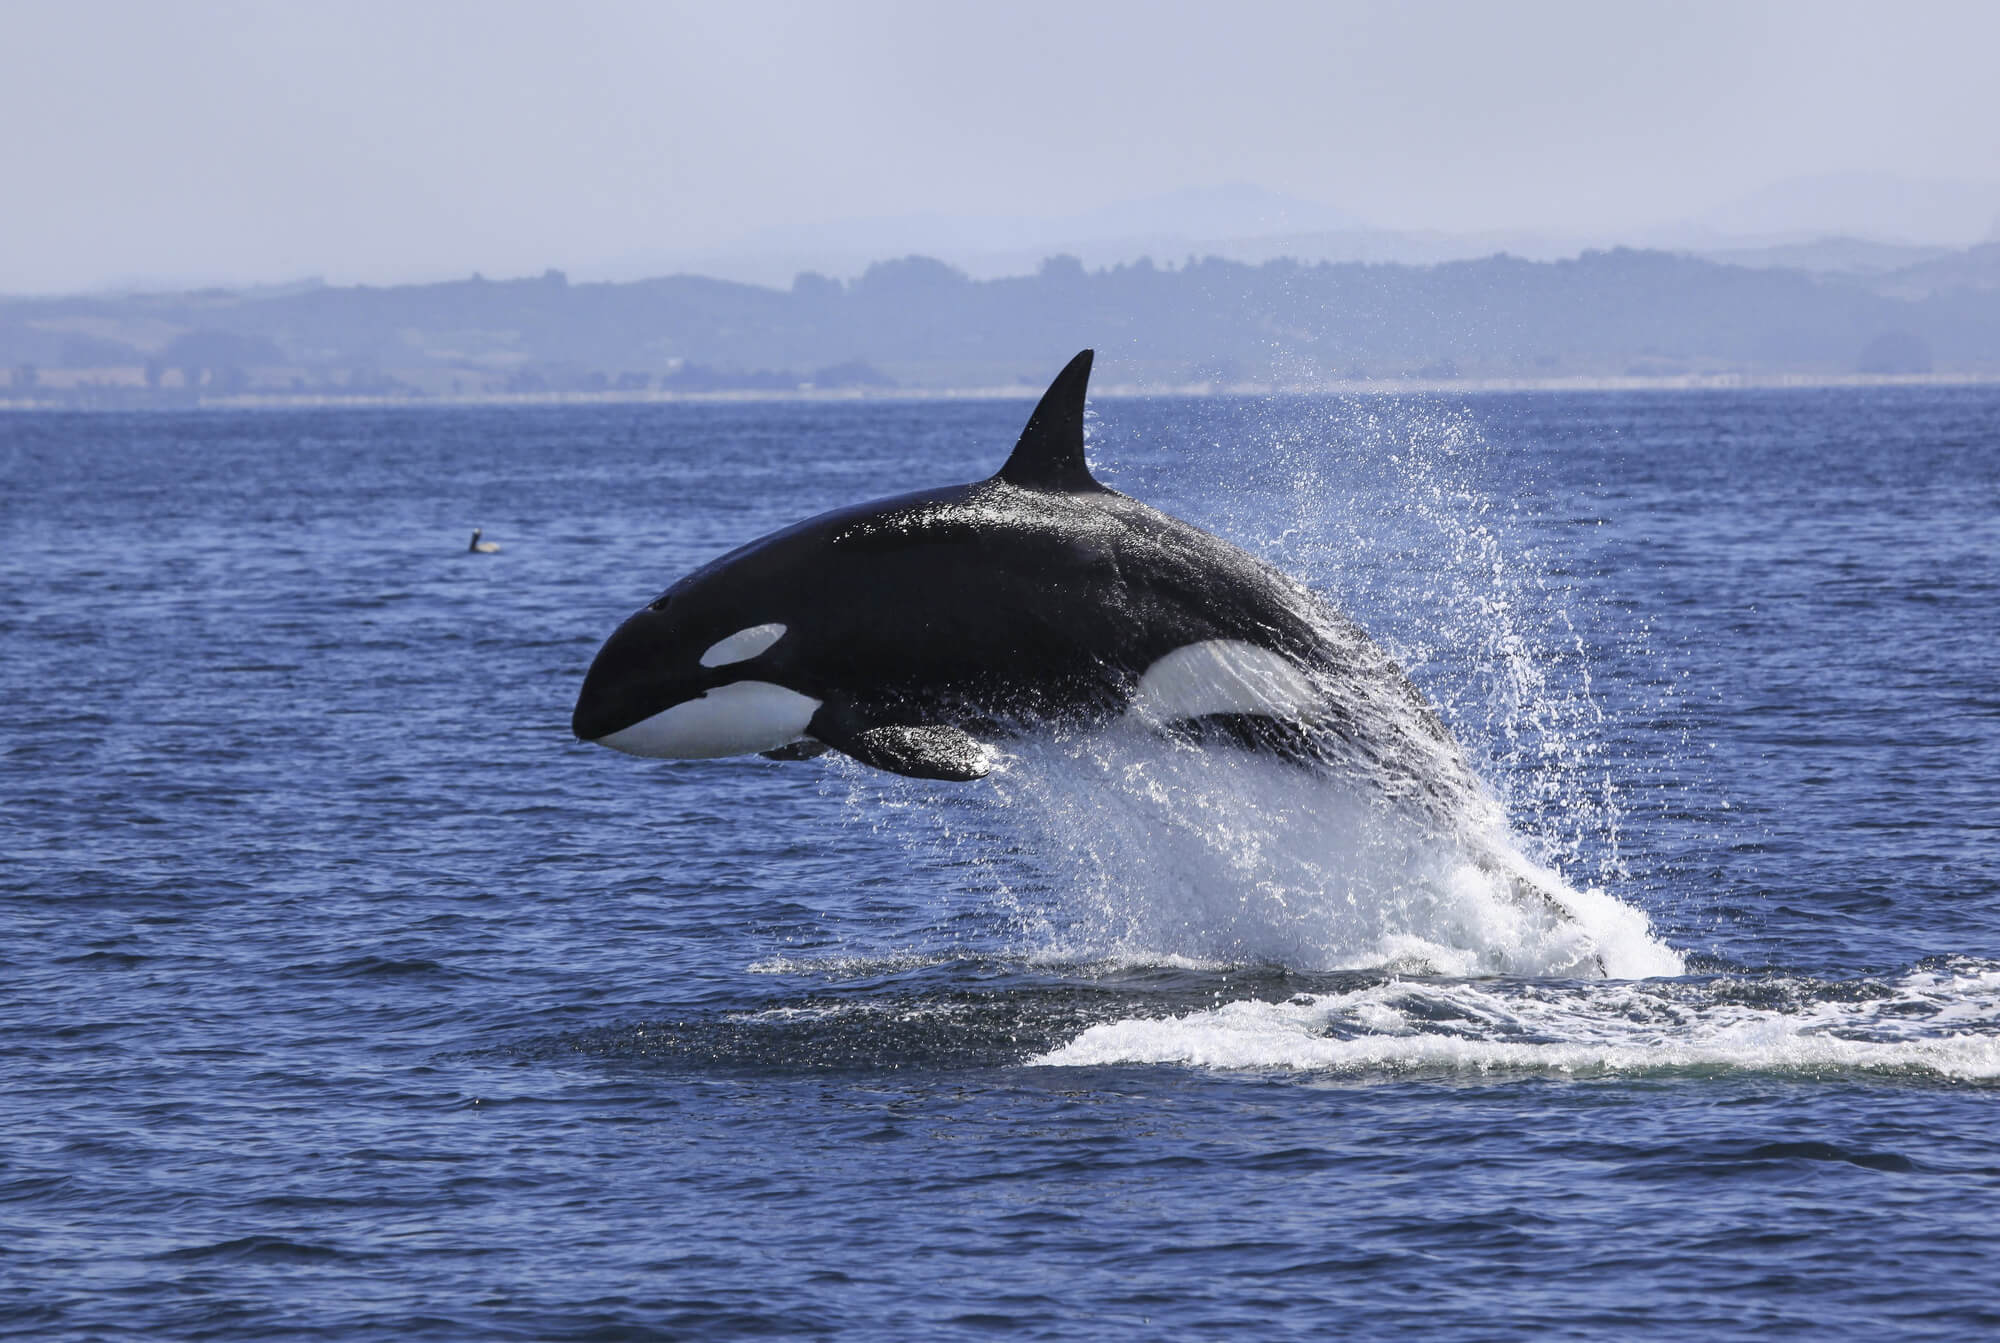 An orca whale leaping out of the sea